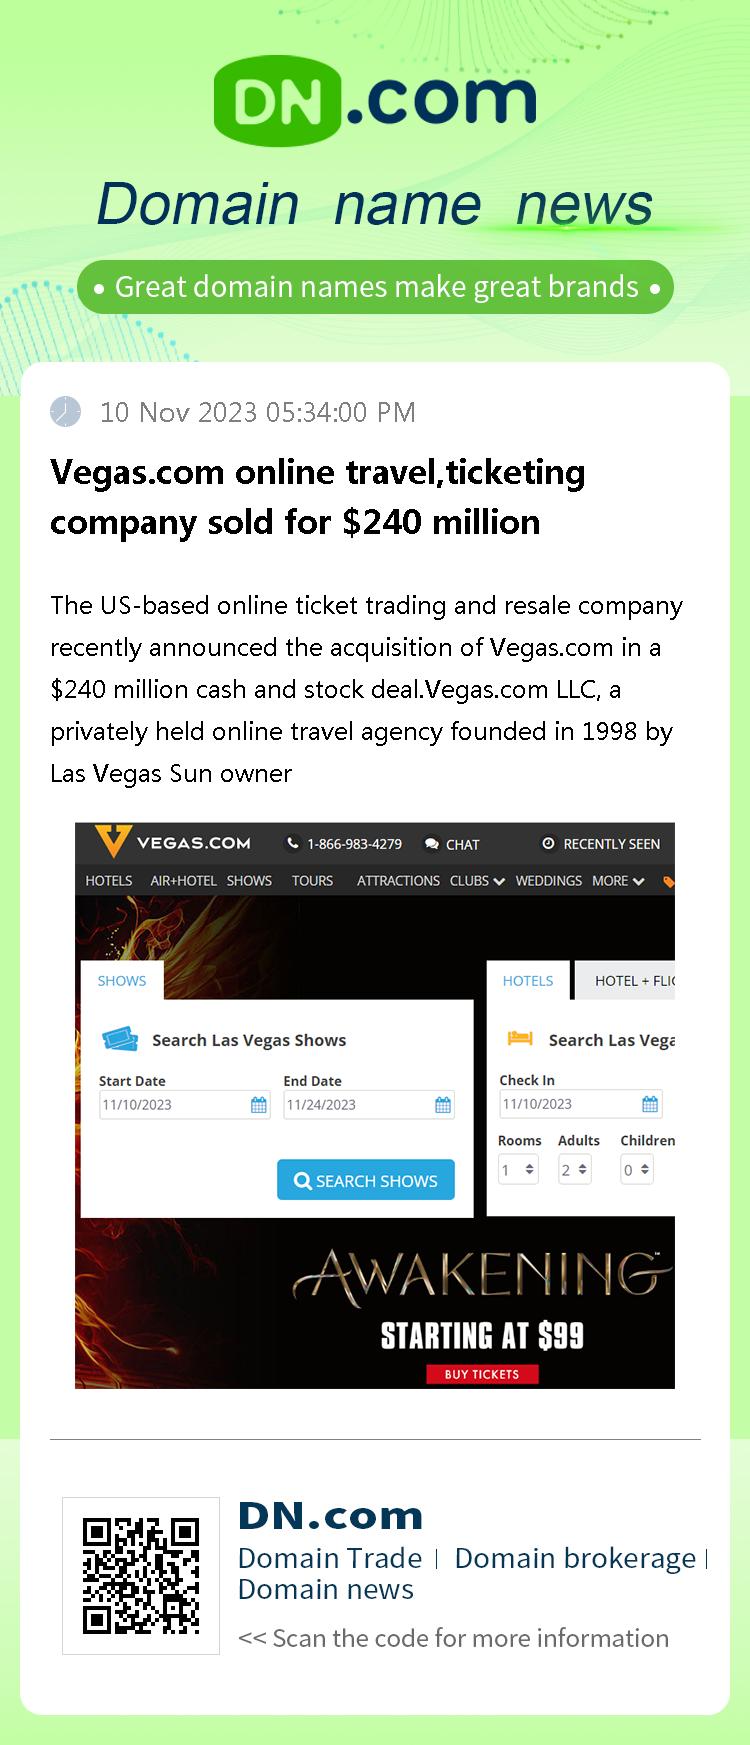 Vegas.com online travel,ticketing company sold for $240 million